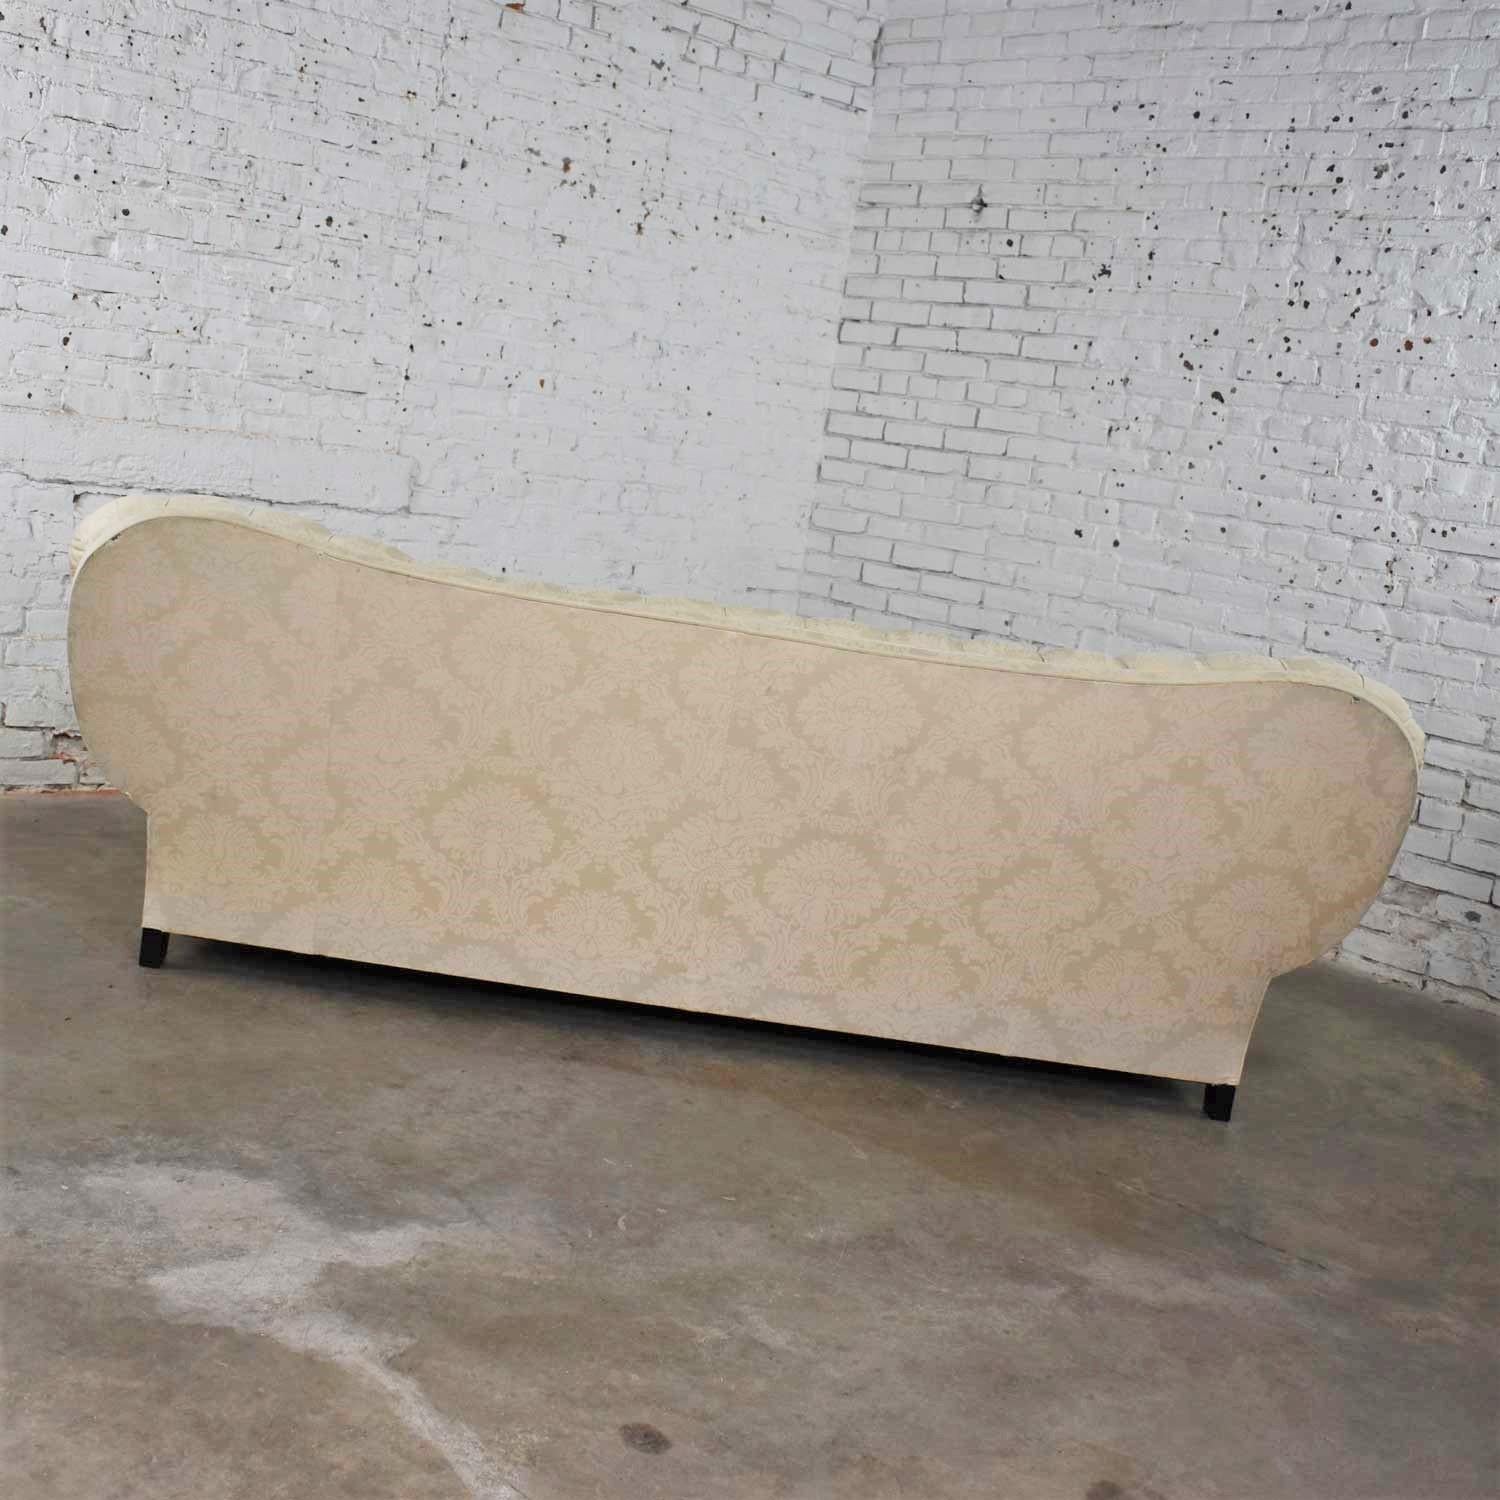 Vintage Art Deco Hollywood Regency Sofa Tufted Back and Concave Pillowed Arms For Sale 4